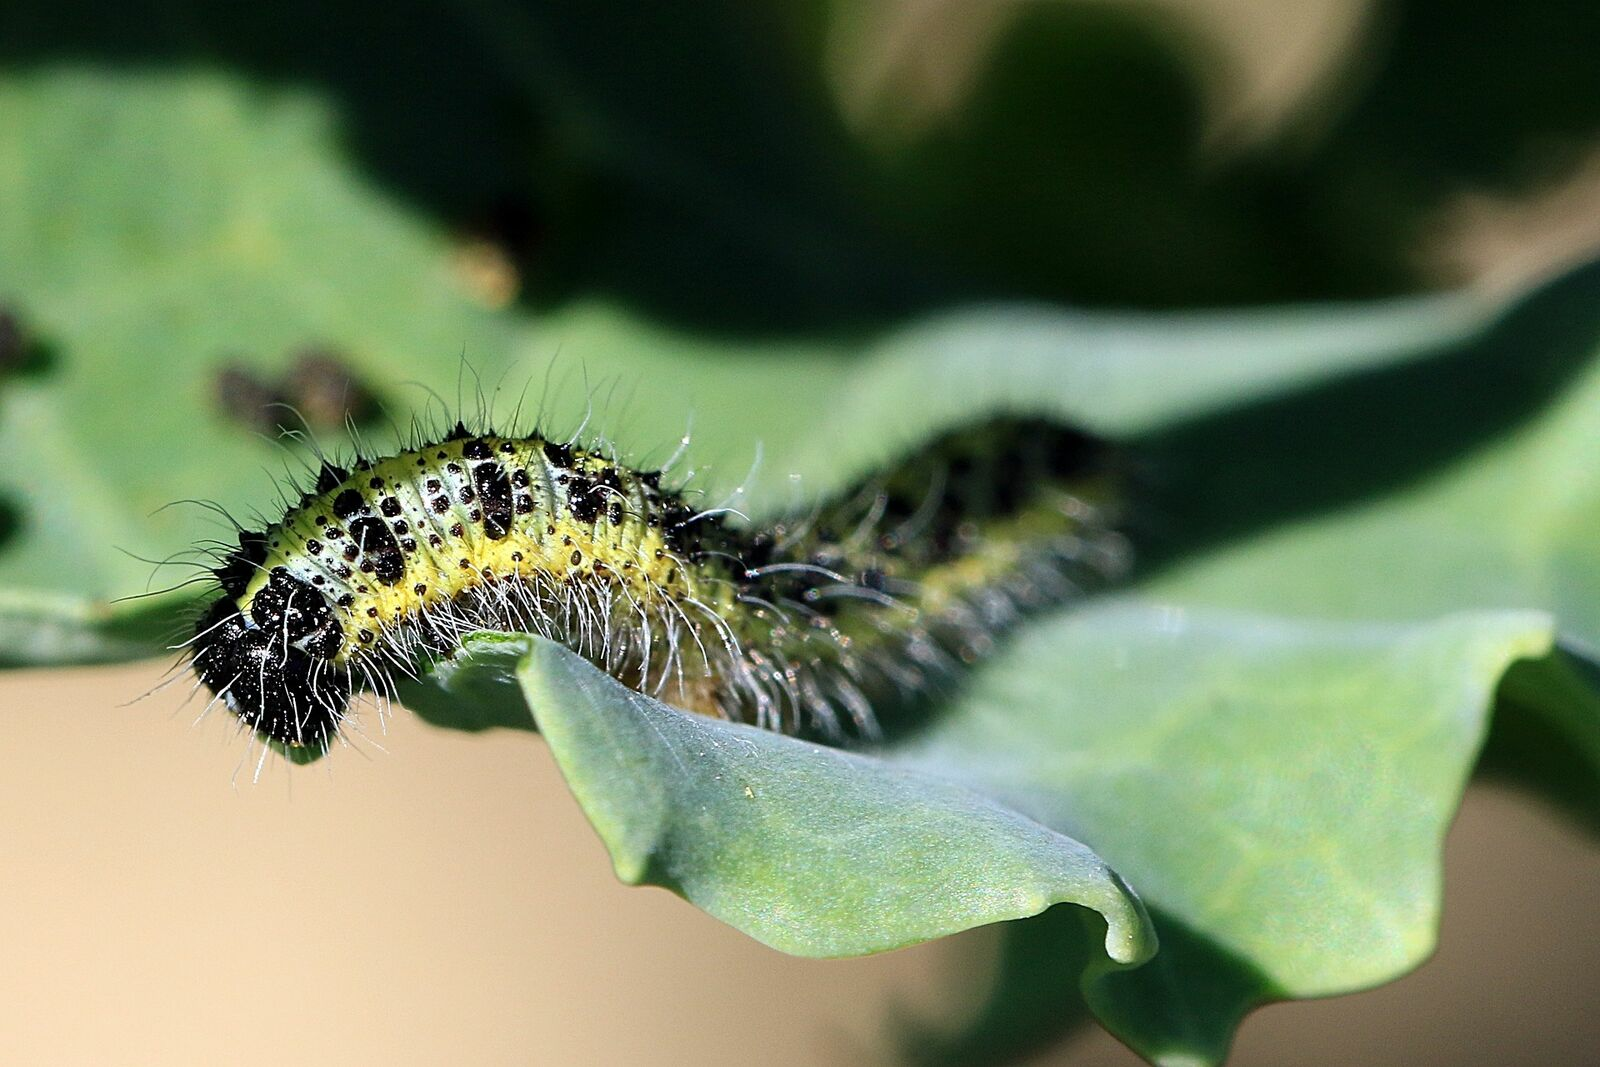 Cabbage white control: About cabbage white caterpillars and eggs